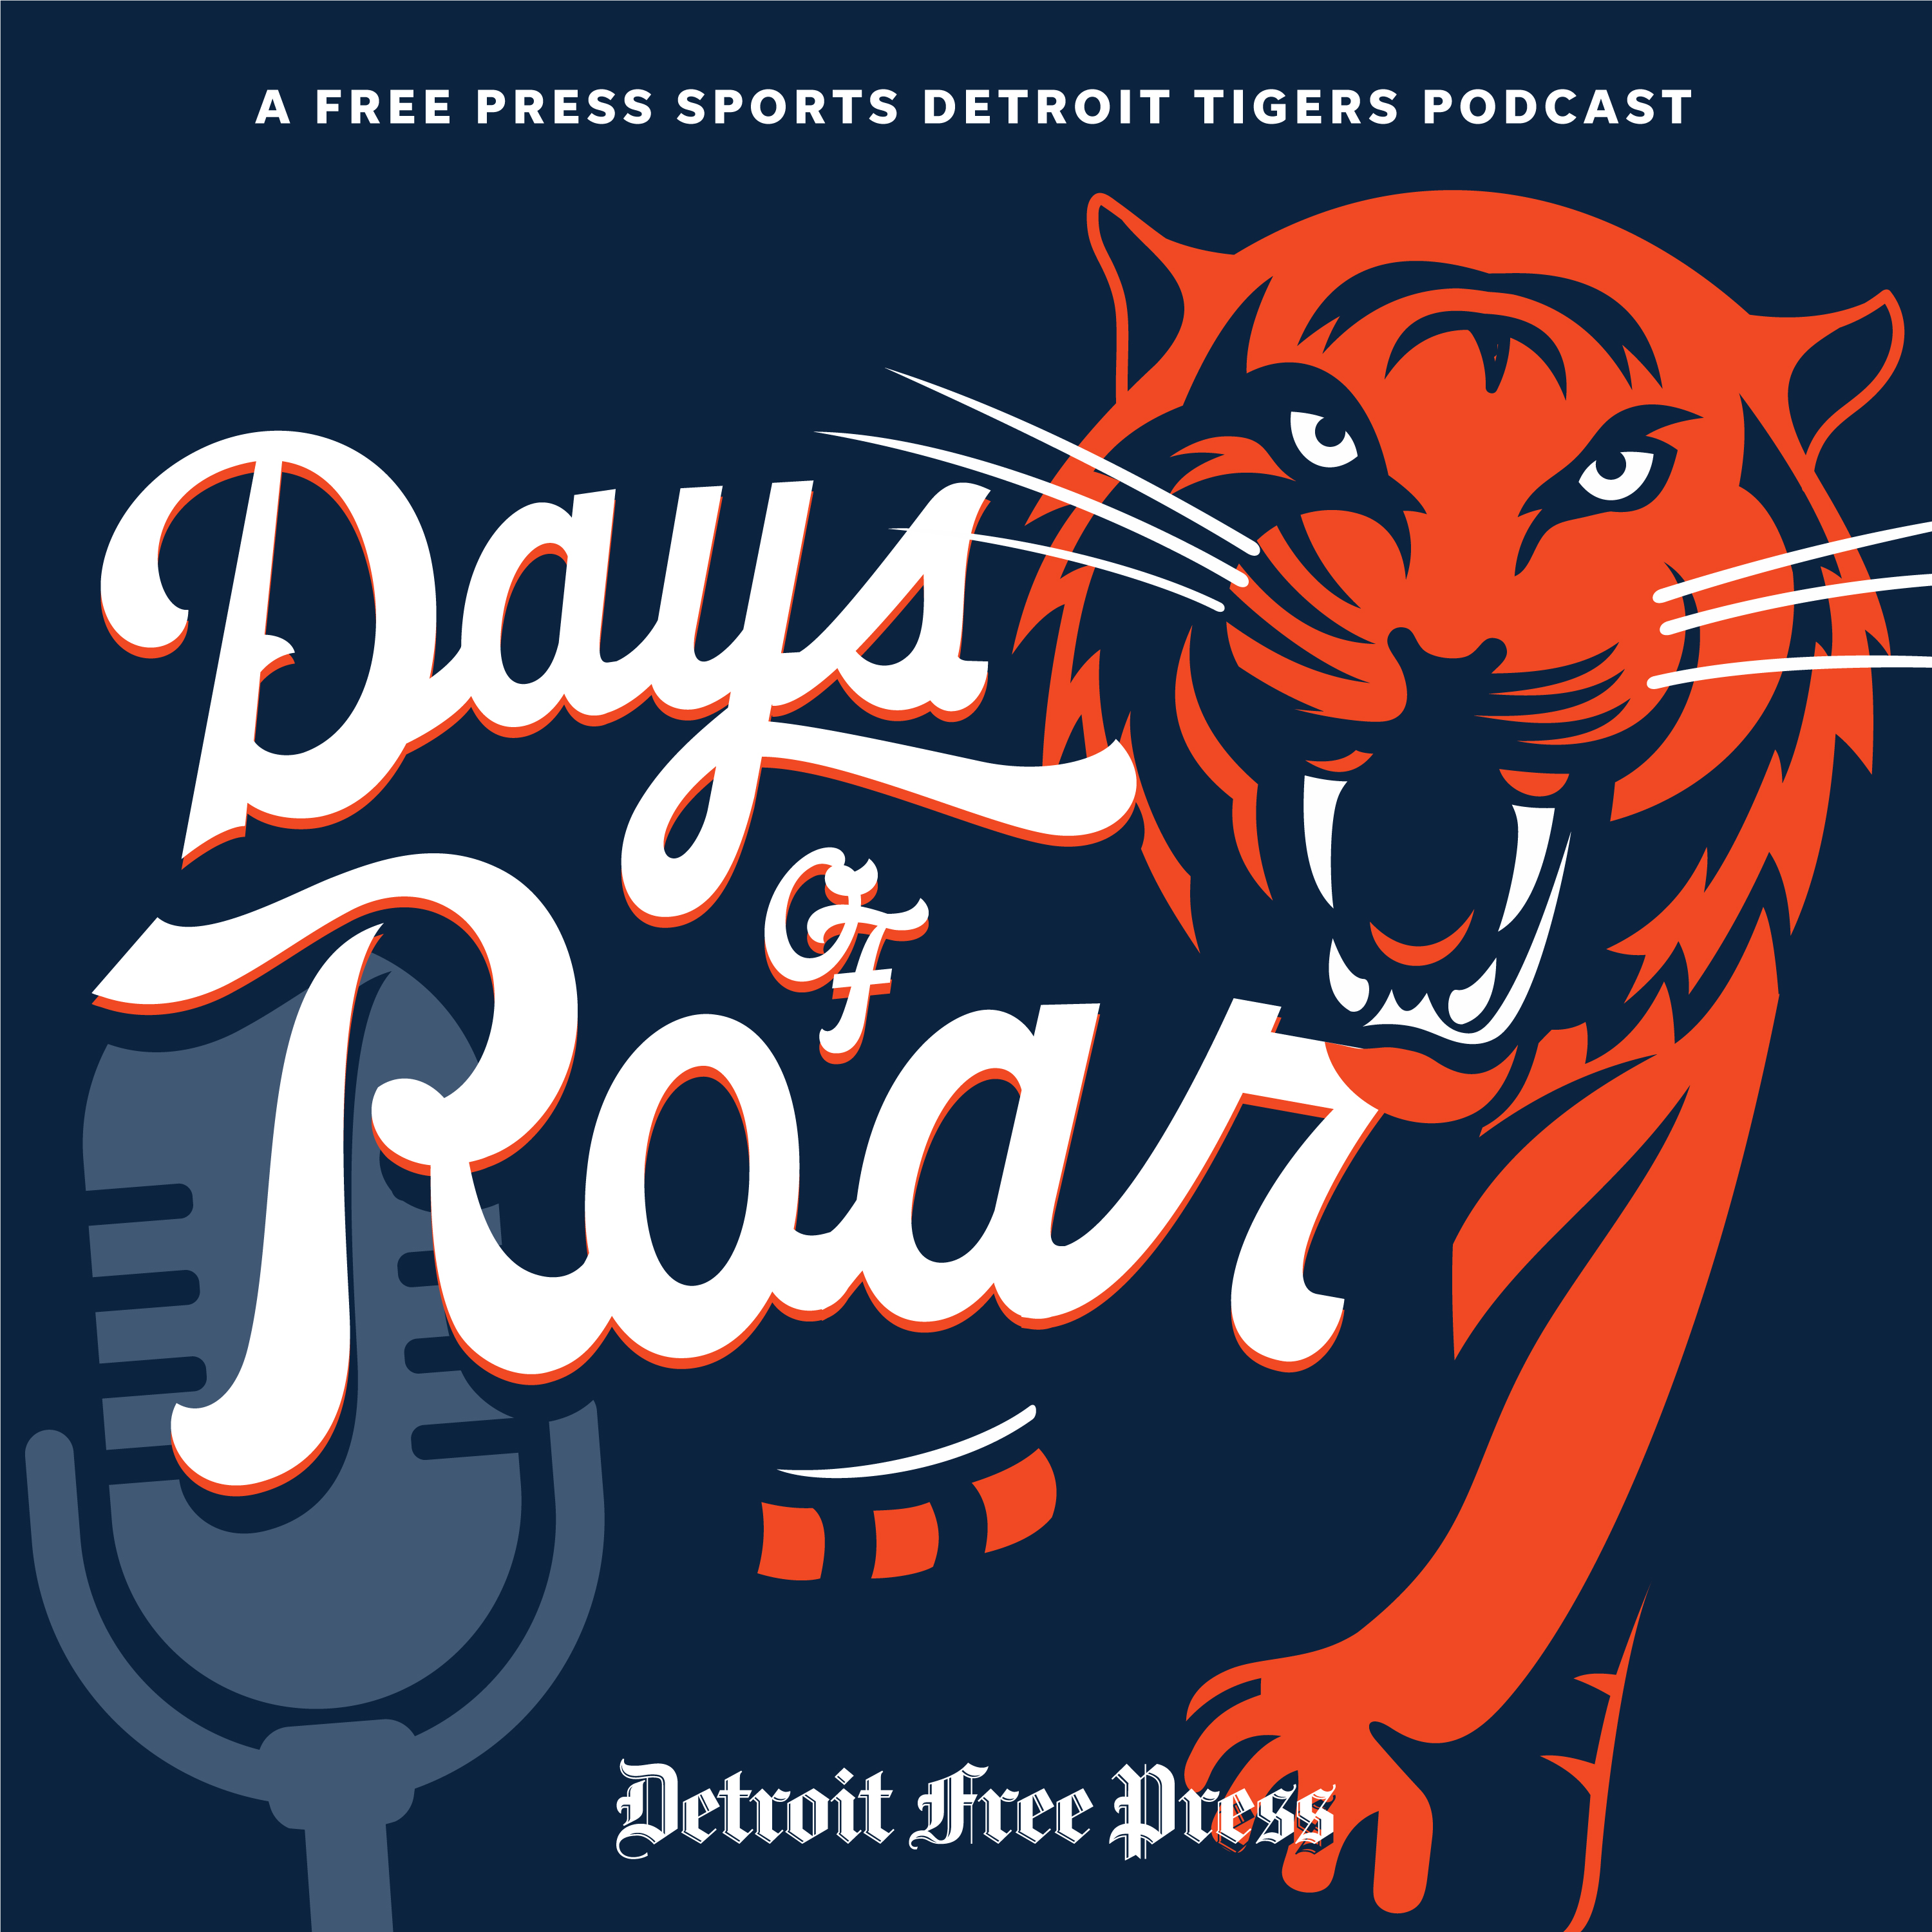 Recapping first week of Detroit Tigers spring training, explaining expectations from management, players